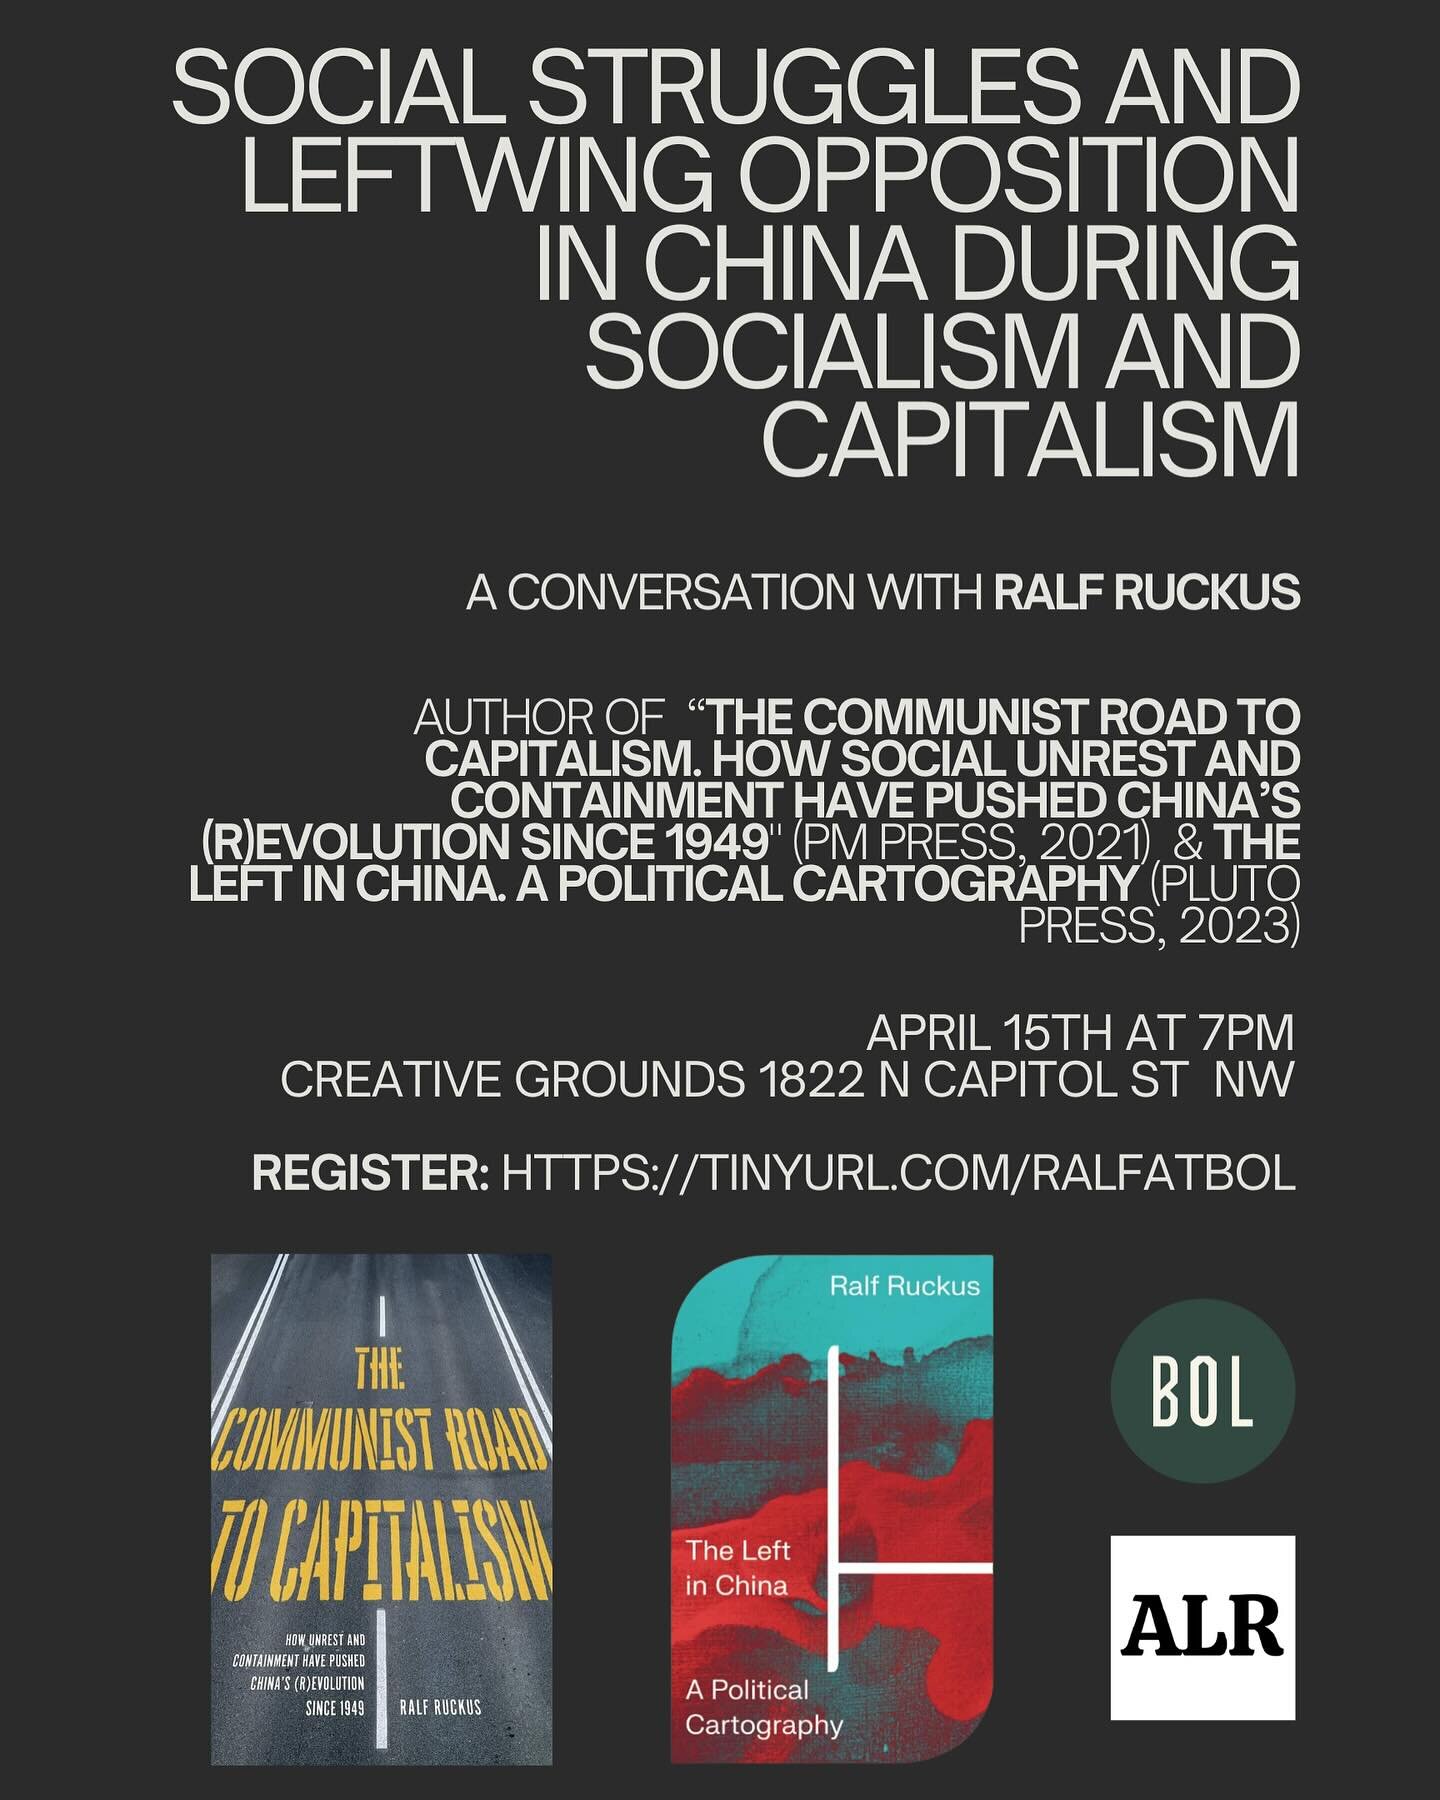 Join us for an insightful event diving into the complexities of social movements and political opposition in China.

In this event, Ralf Ruckus will present the arguments of two recent books. The Communist Road to Capitalism. How Social Unrest and Co